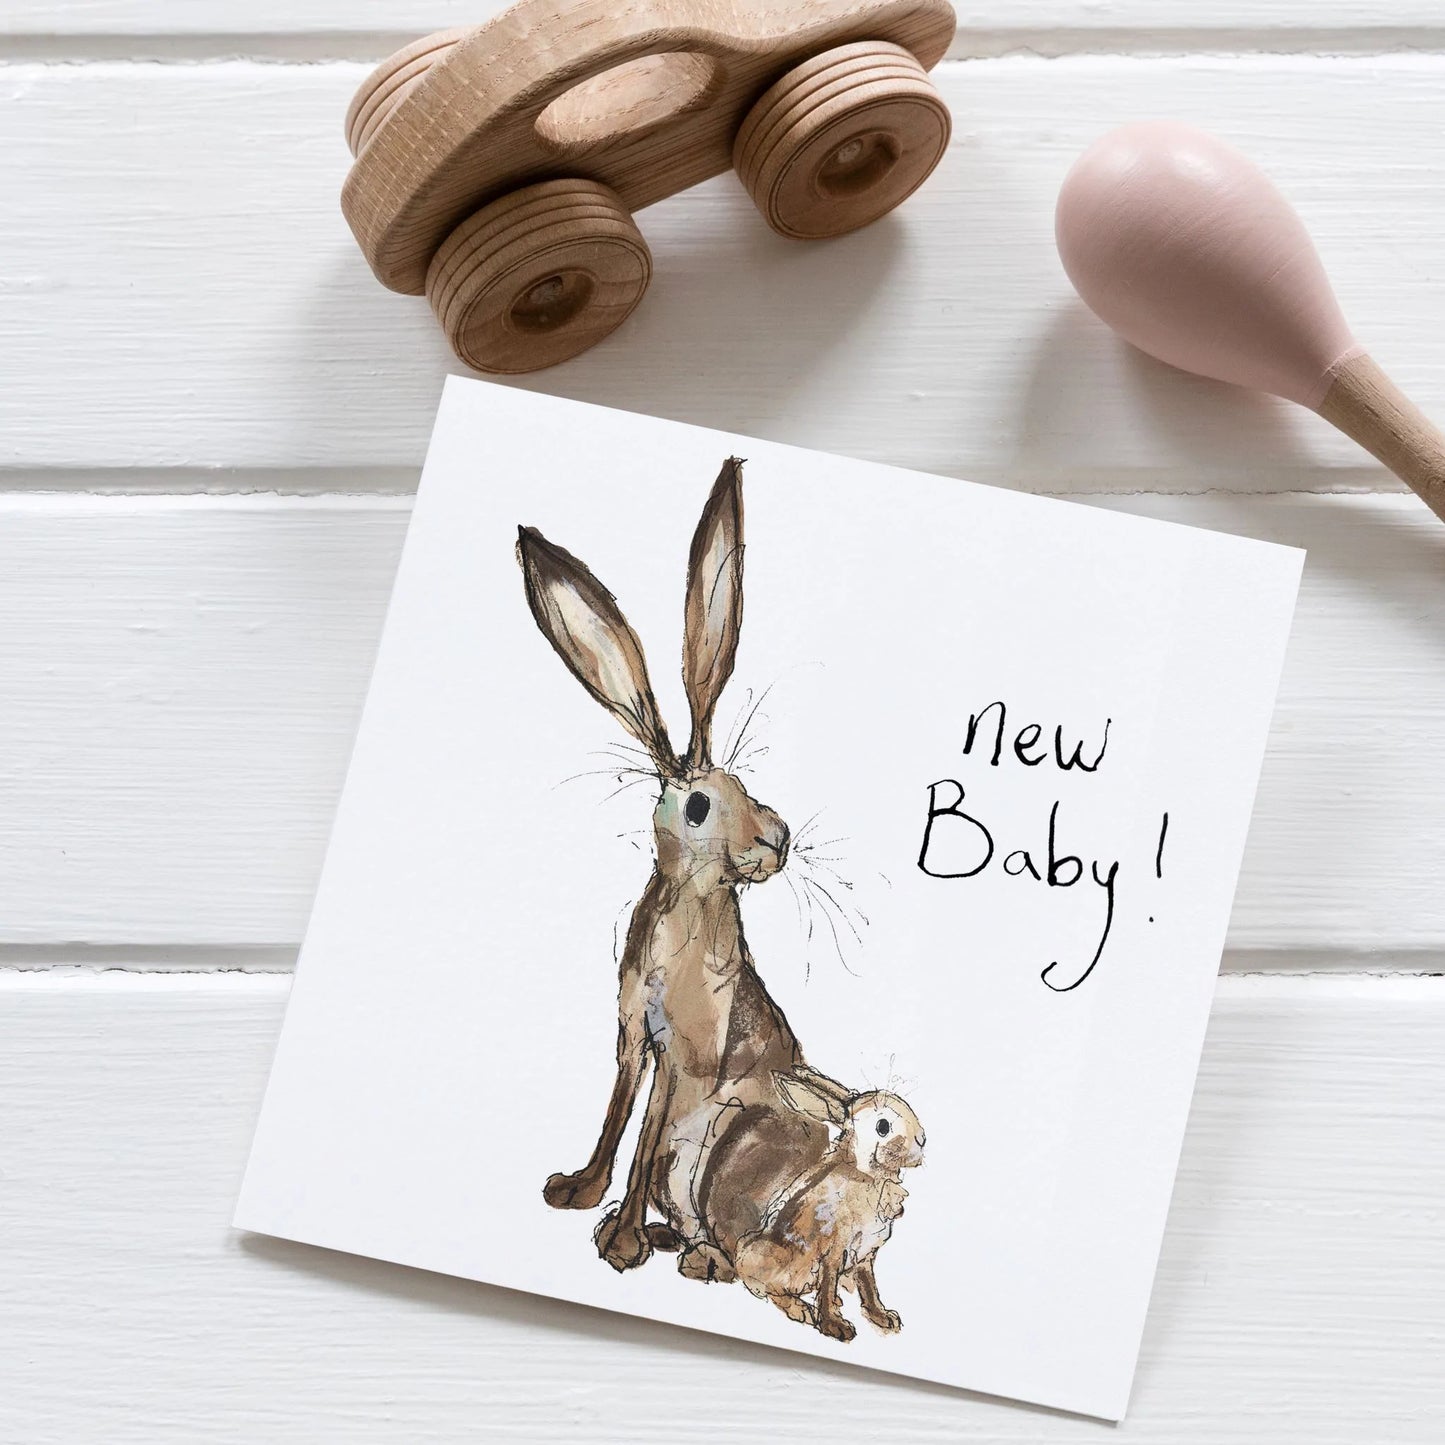 New Baby Molly & Meredith Hare Greetings Card